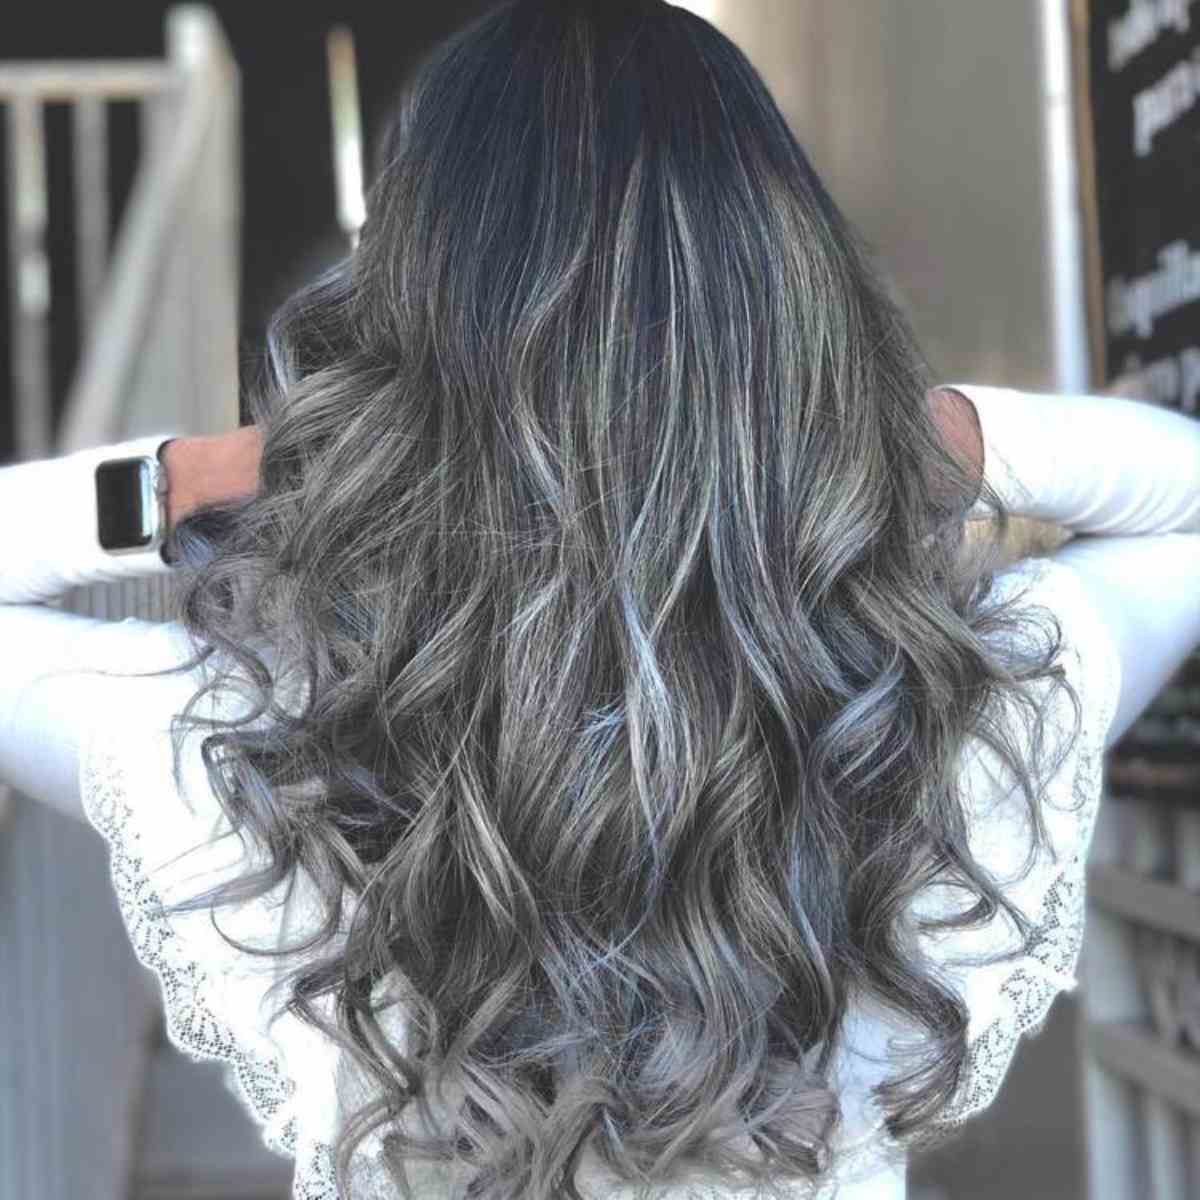 Black go what highlights hair with Go Color